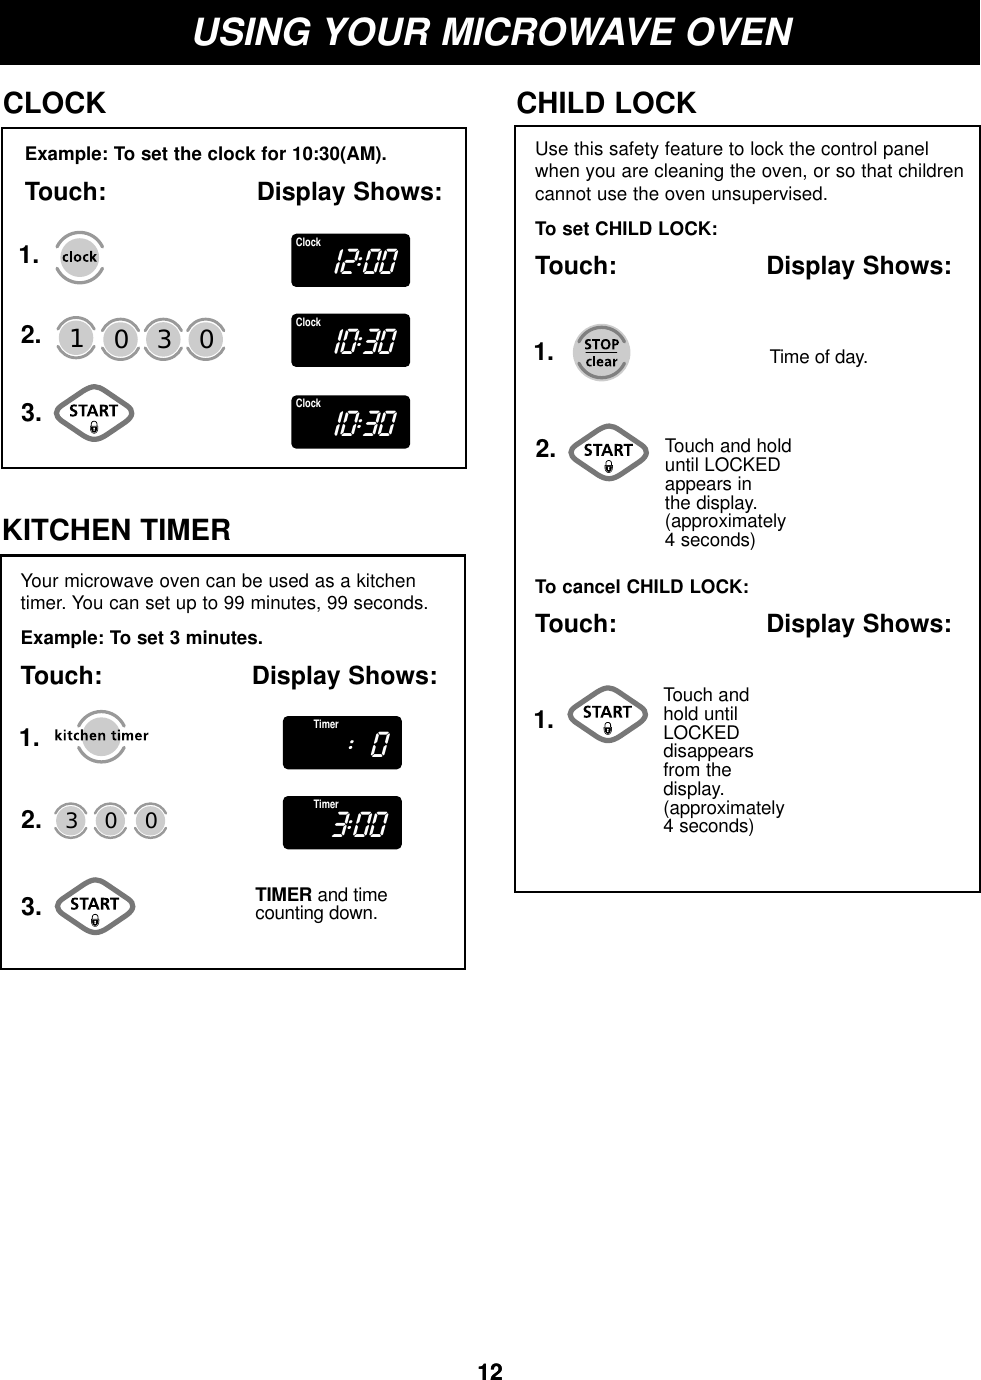 1212USING YOUR MICROWAVE OVENExample: To set the clock for 10:30(AM).Touch: Display Shows:CLOCK1.2.3.Use this safety feature to lock the control panelwhen you are cleaning the oven, or so that childrencannot use the oven unsupervised.To set CHILD LOCK:Touch: Display Shows:CHILD LOCKTouch and hold until LOCKED appears in the display.(approximately 4 seconds)To cancel CHILD LOCK:Touch: Display Shows:Touch and hold until LOCKEDdisappears from the display. (approximately 4 seconds)Time of day.130 01.1.2.Your microwave oven can be used as a kitchentimer. You can set up to 99 minutes, 99 seconds.Example: To set 3 minutes.Touch: Display Shows:KITCHEN TIMERTIMER and timecounting down.30 01.2.3.12:00Clock10:30Clock10:30Clock:0Timer3:00Timer